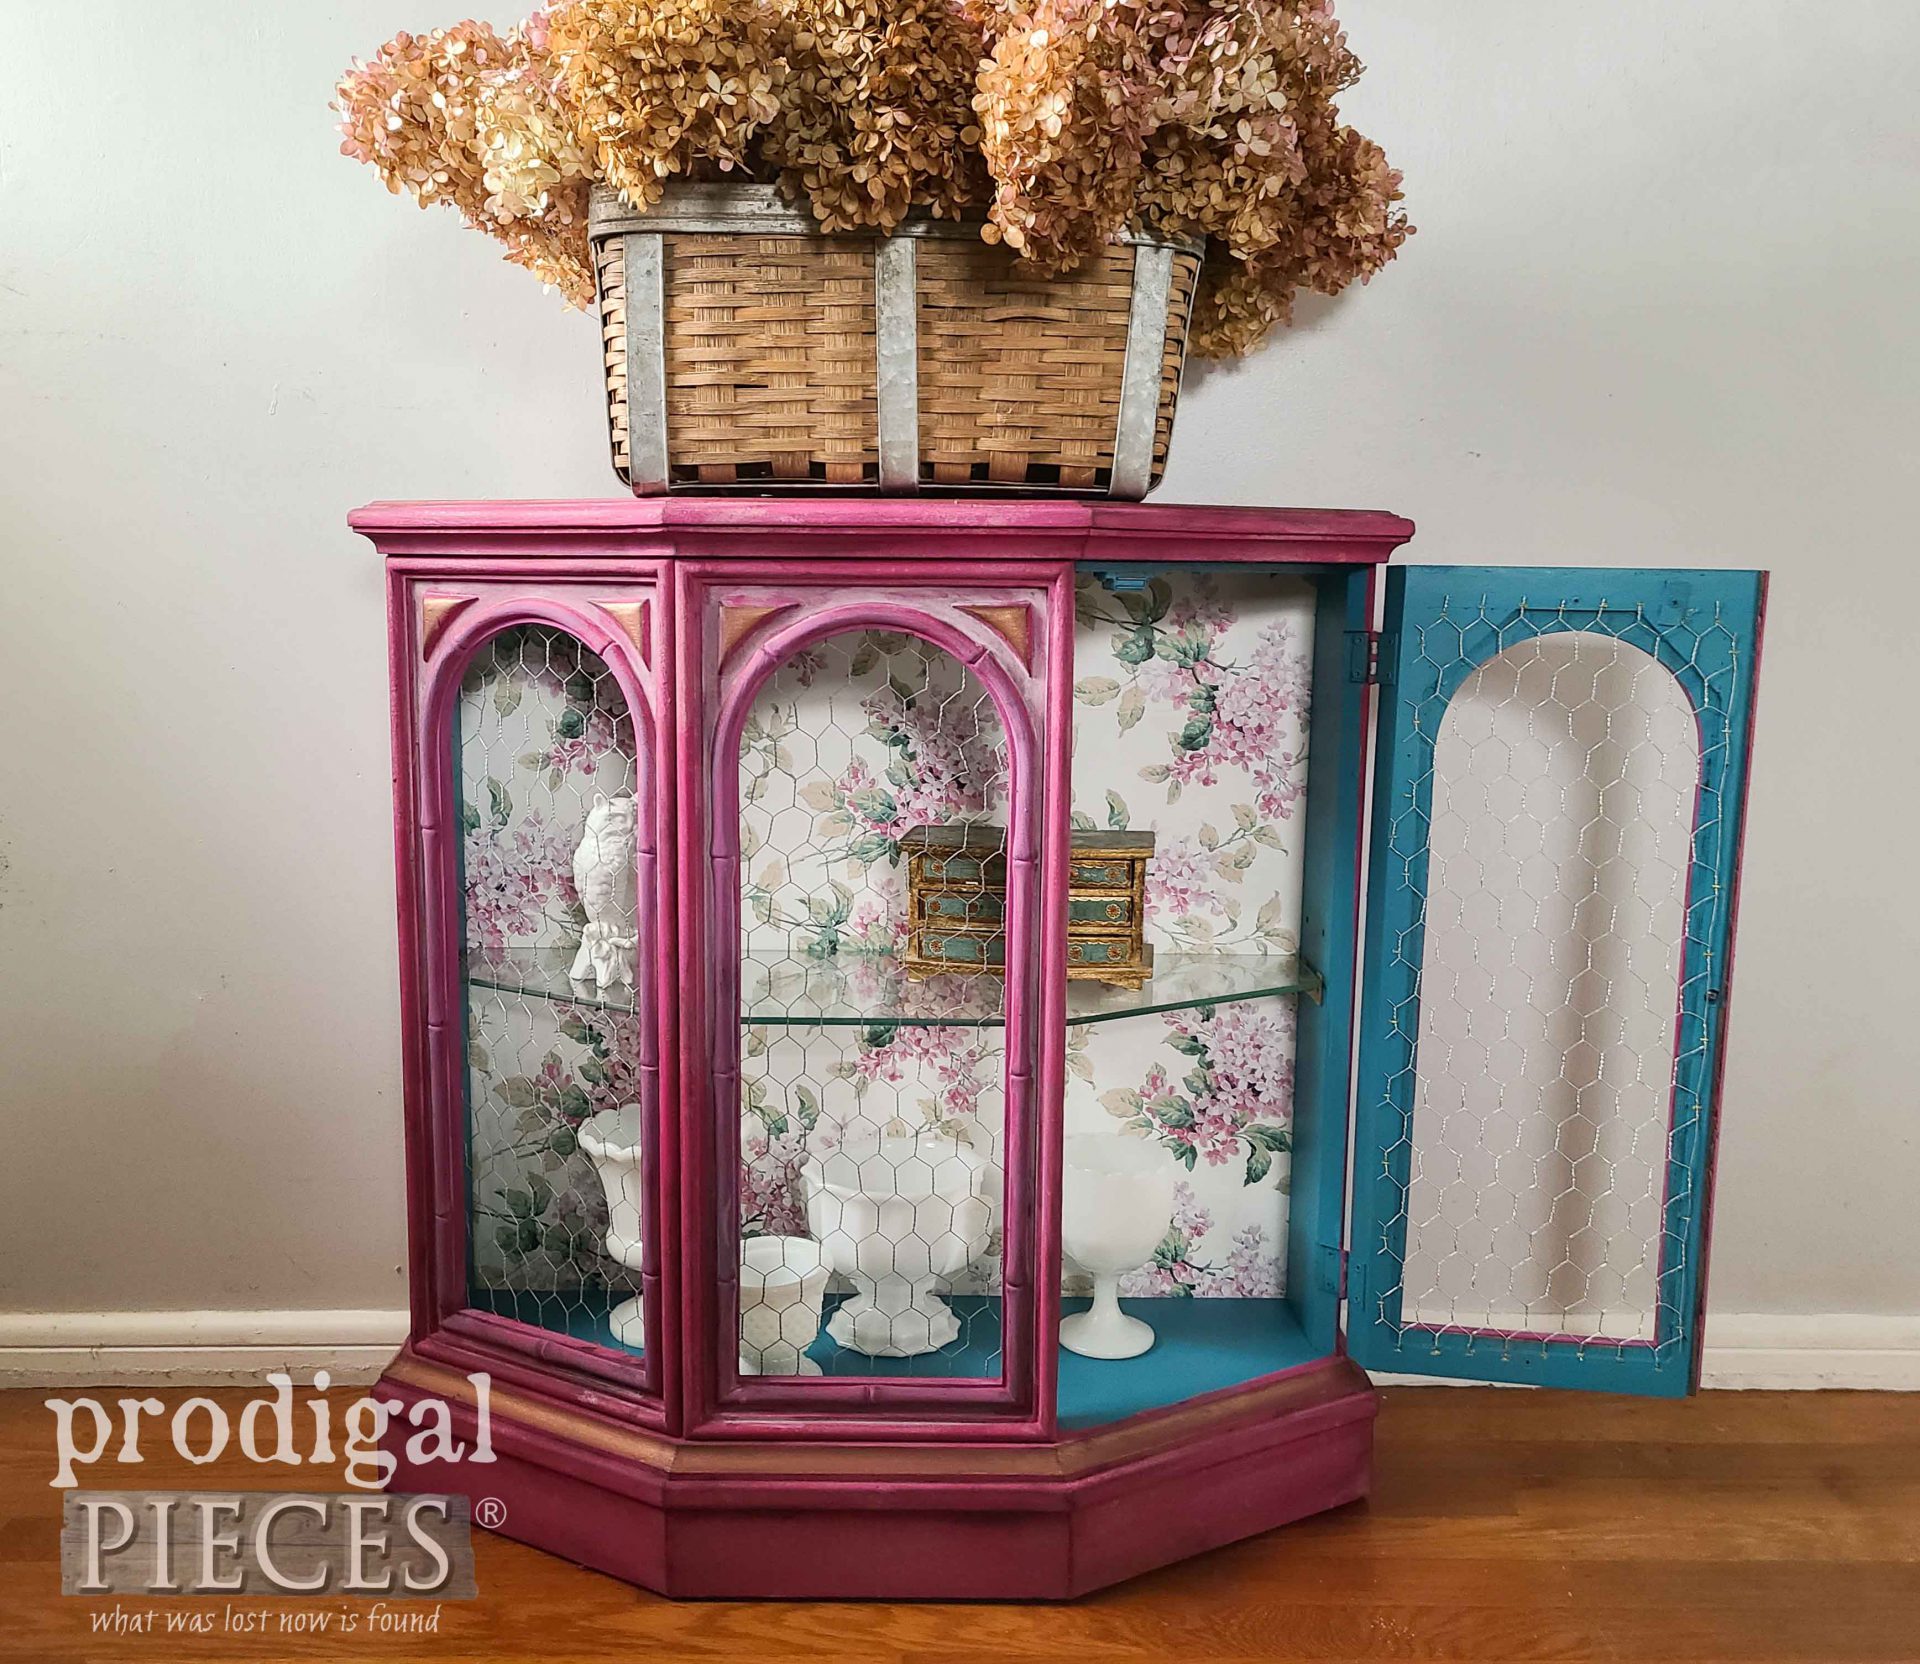 Open Chicken Wire in Vintage Curio Cabinet by Larissa of Prodigal Pieces | prodigalpieces.com #prodigalpieces #vintage #furniture